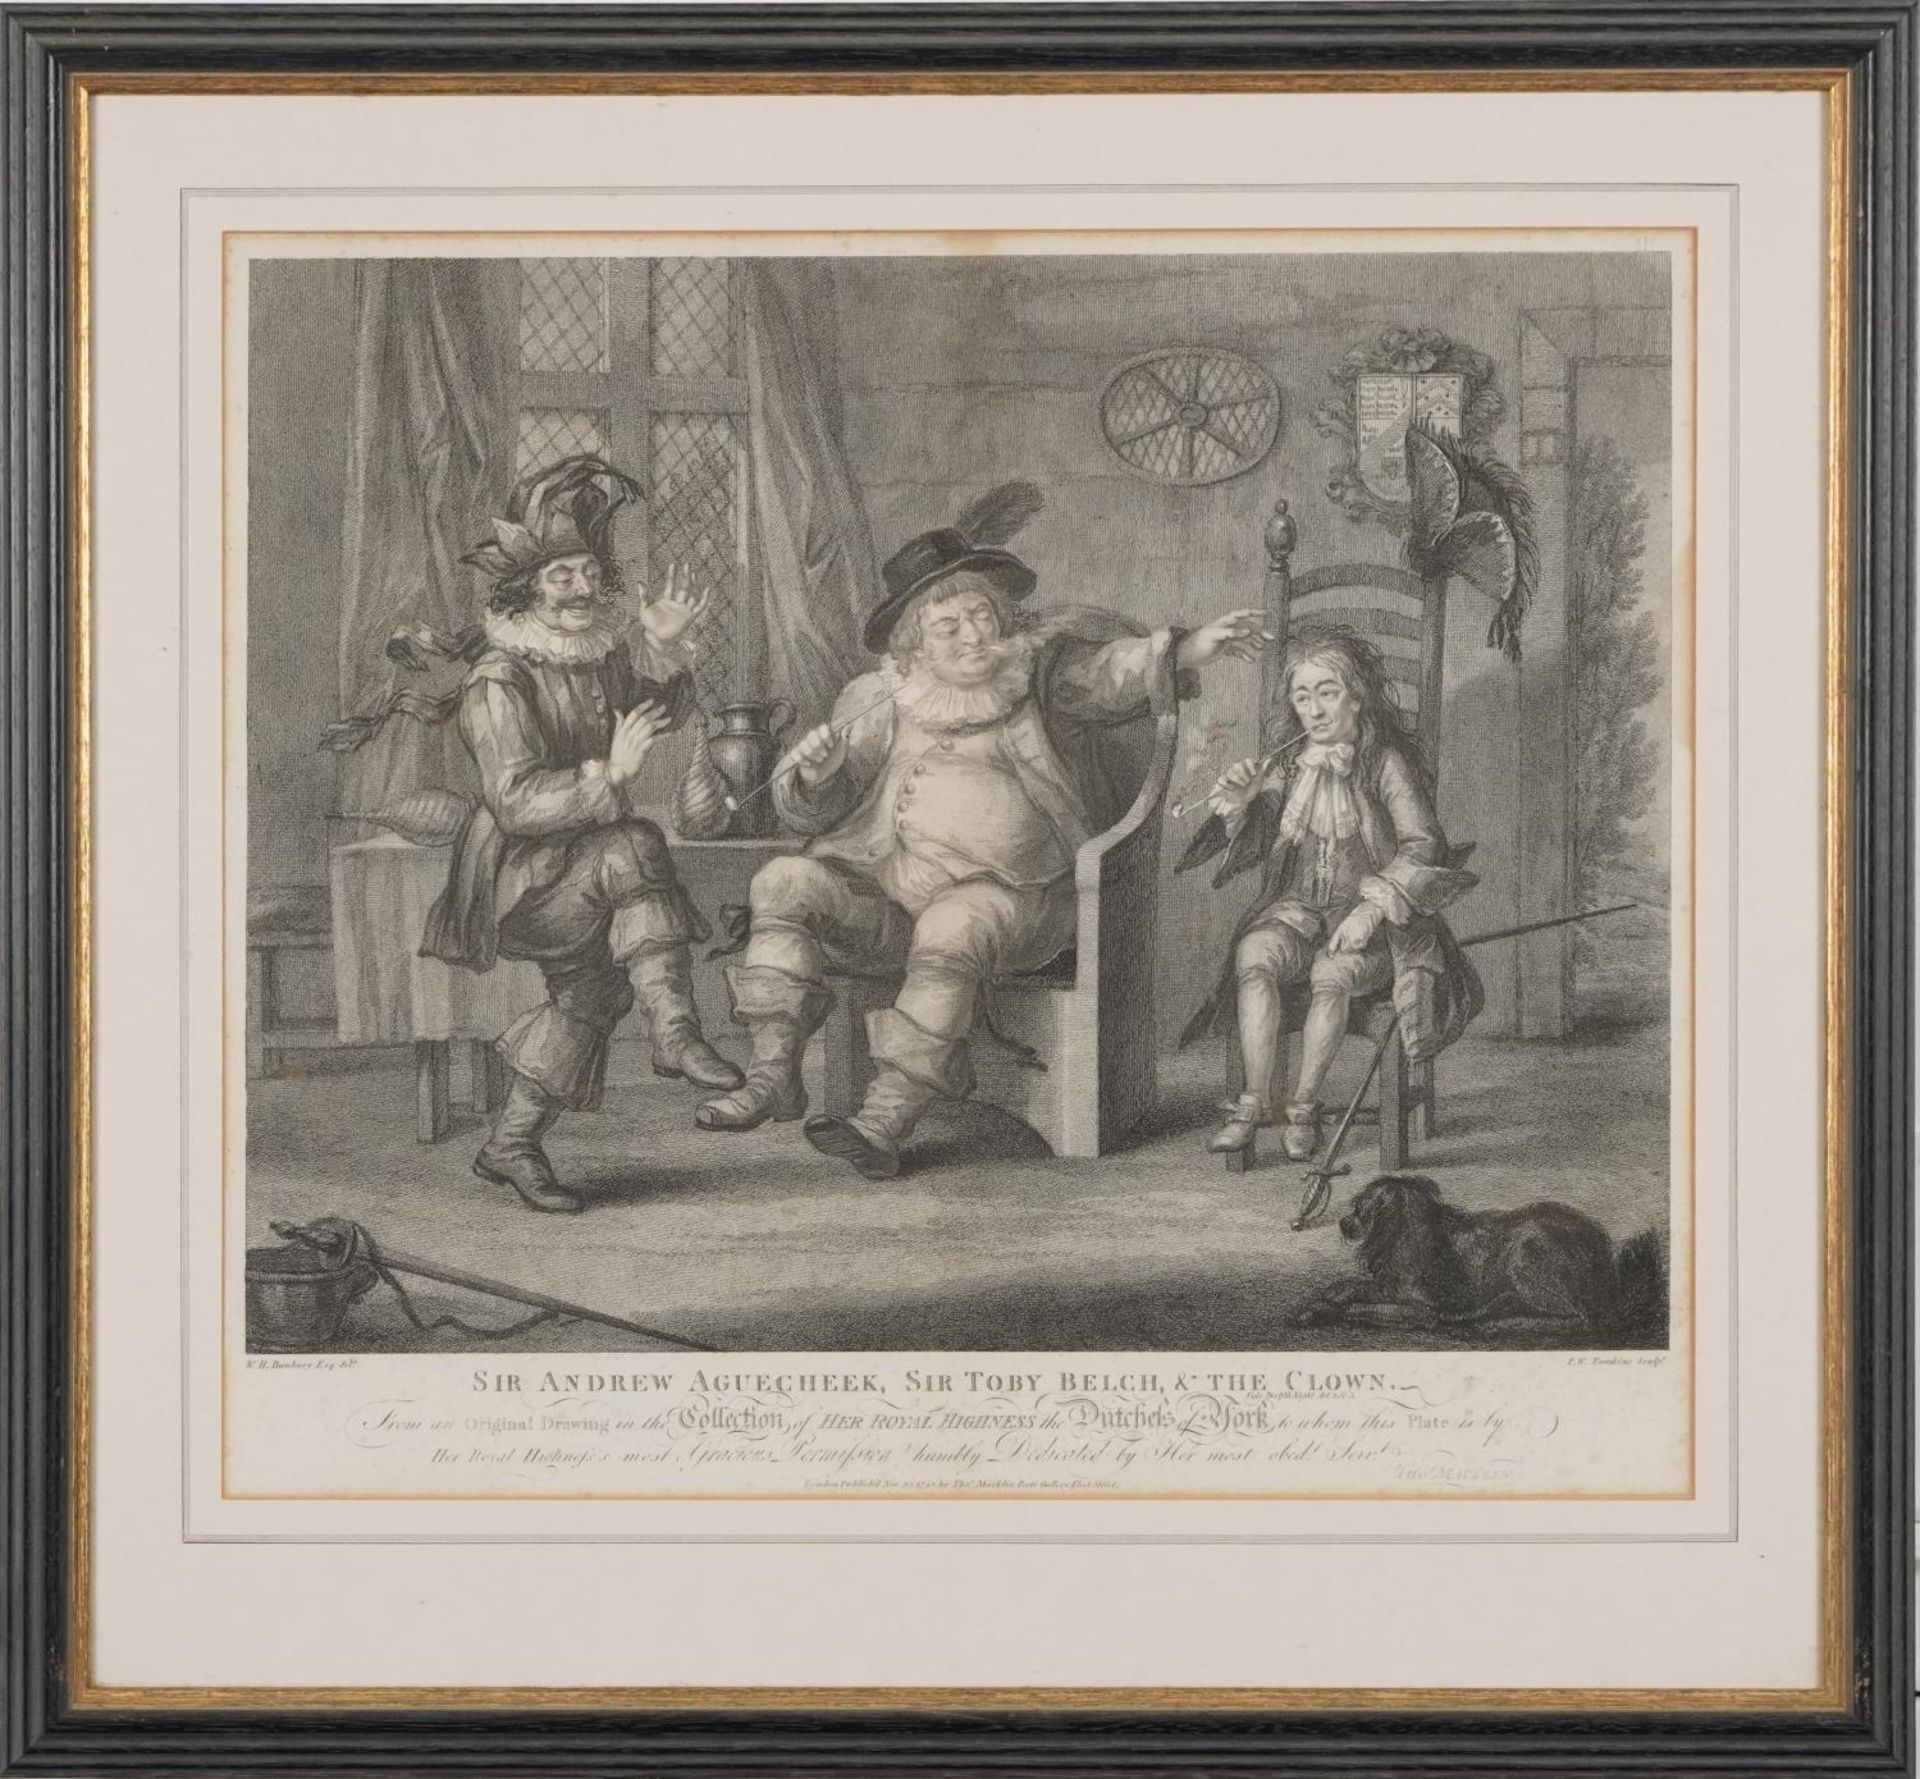 W H Bunbury Esq. - Sir Andrew Aguecheek, Sir Toby Belch and The Clown, black and white print, - Image 2 of 4